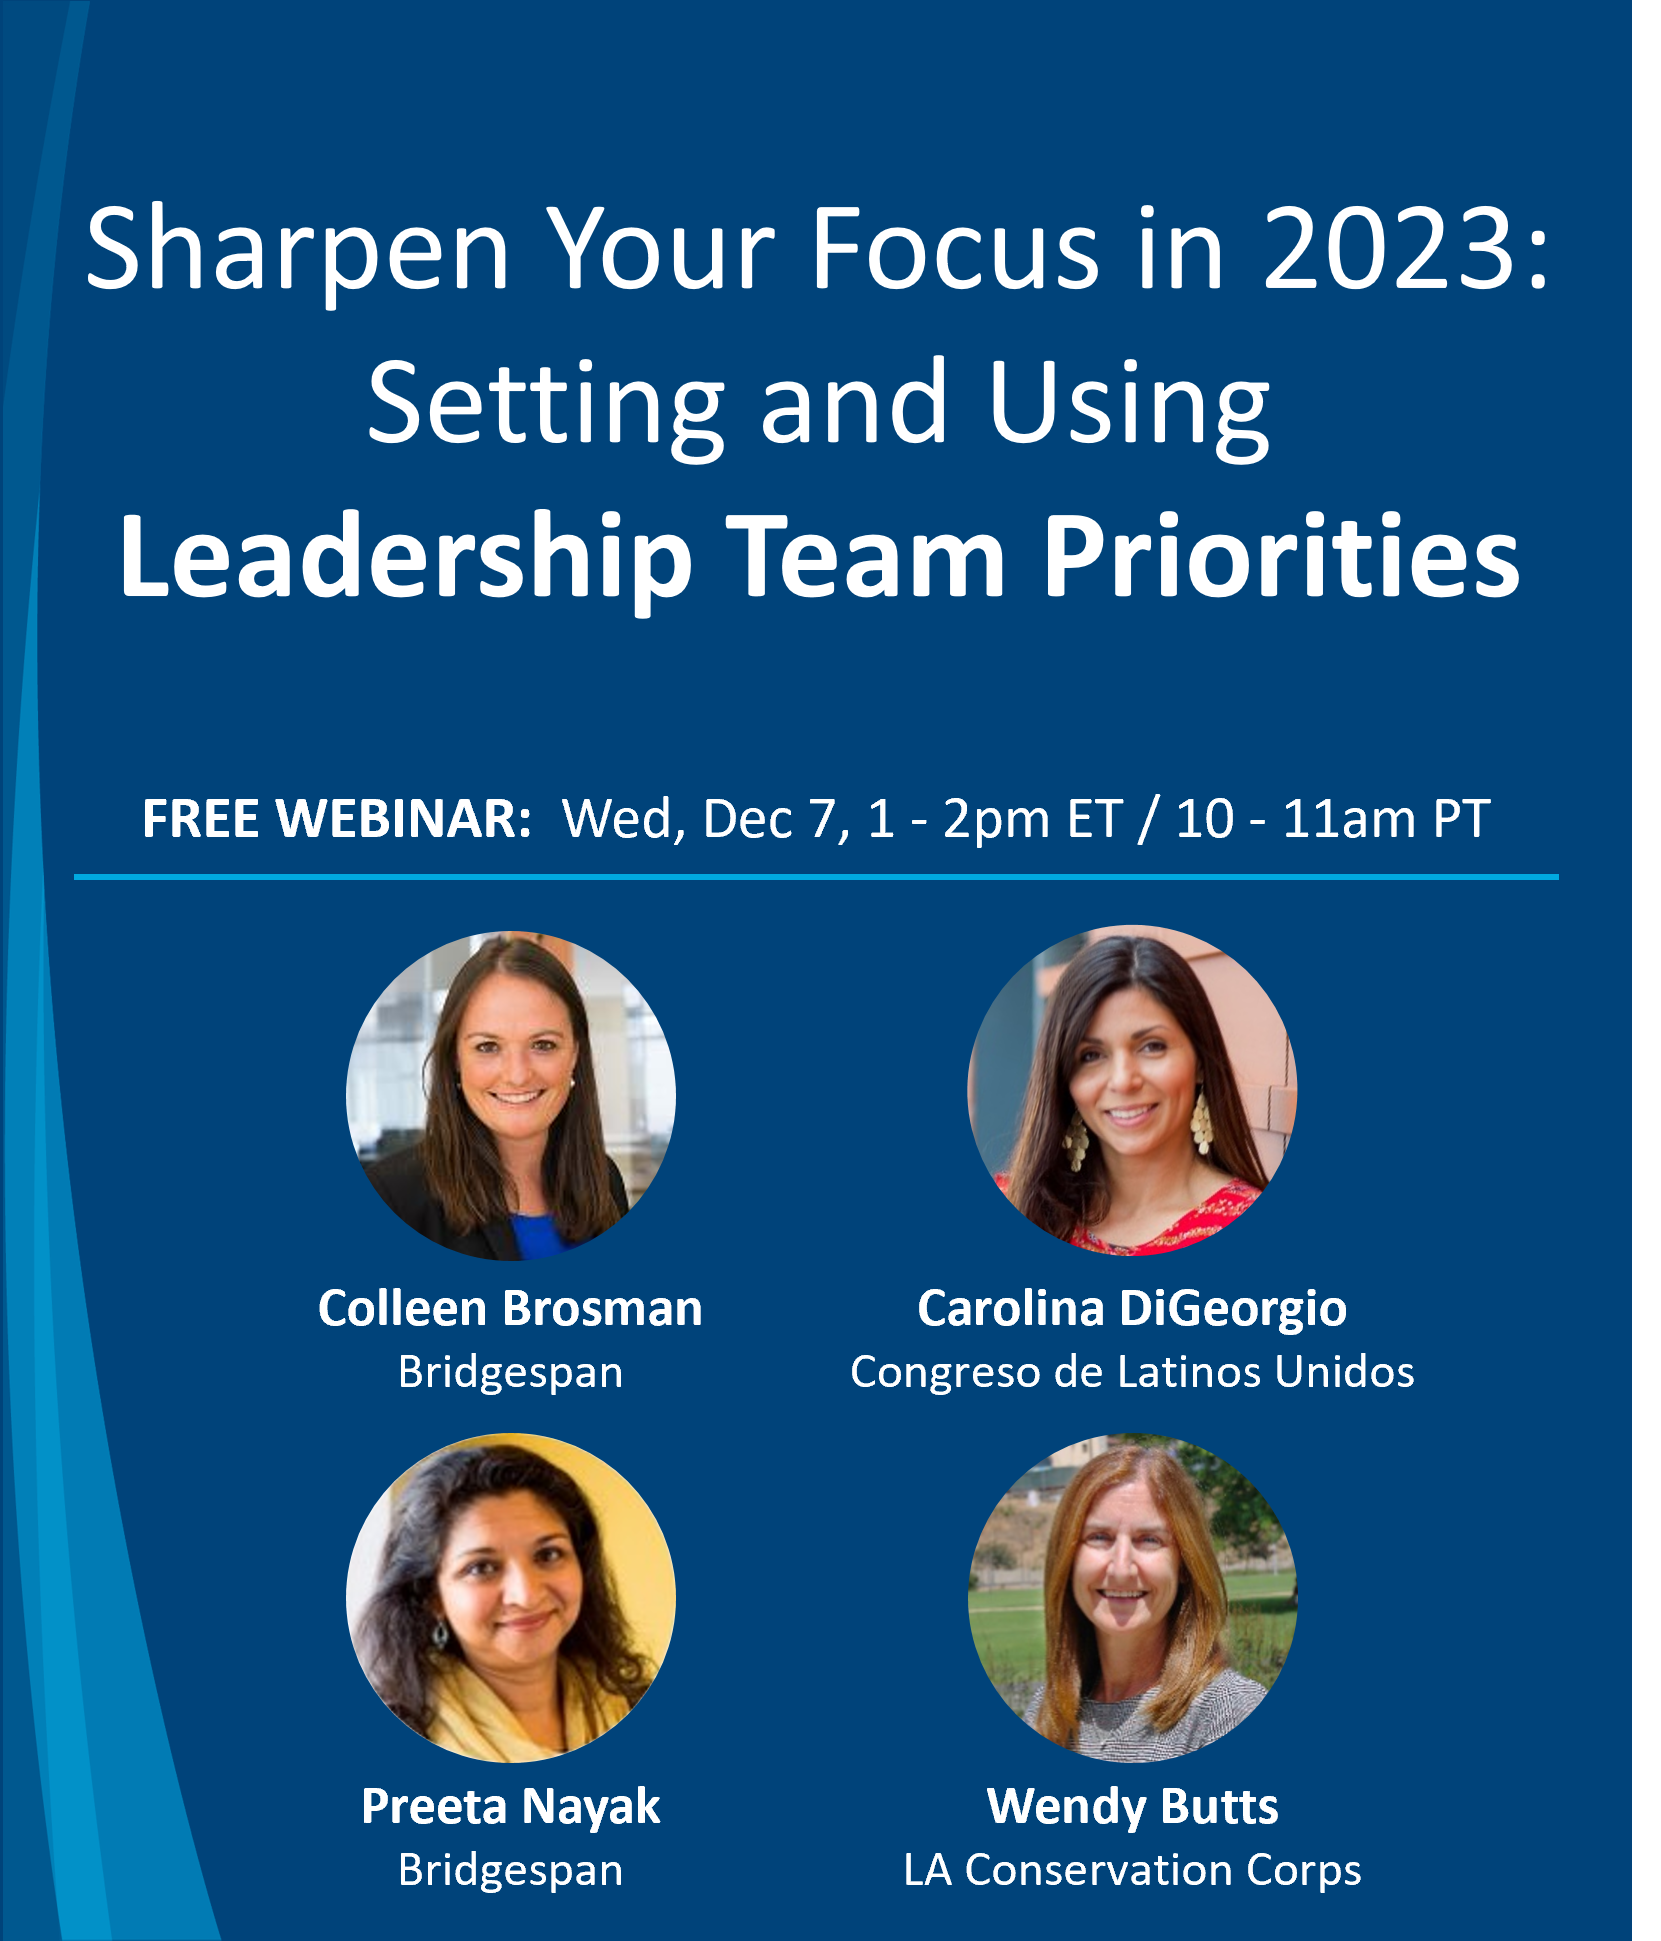 Sharpen Your Focus in 2023: Setting and Using Leadership Team Priorities Image